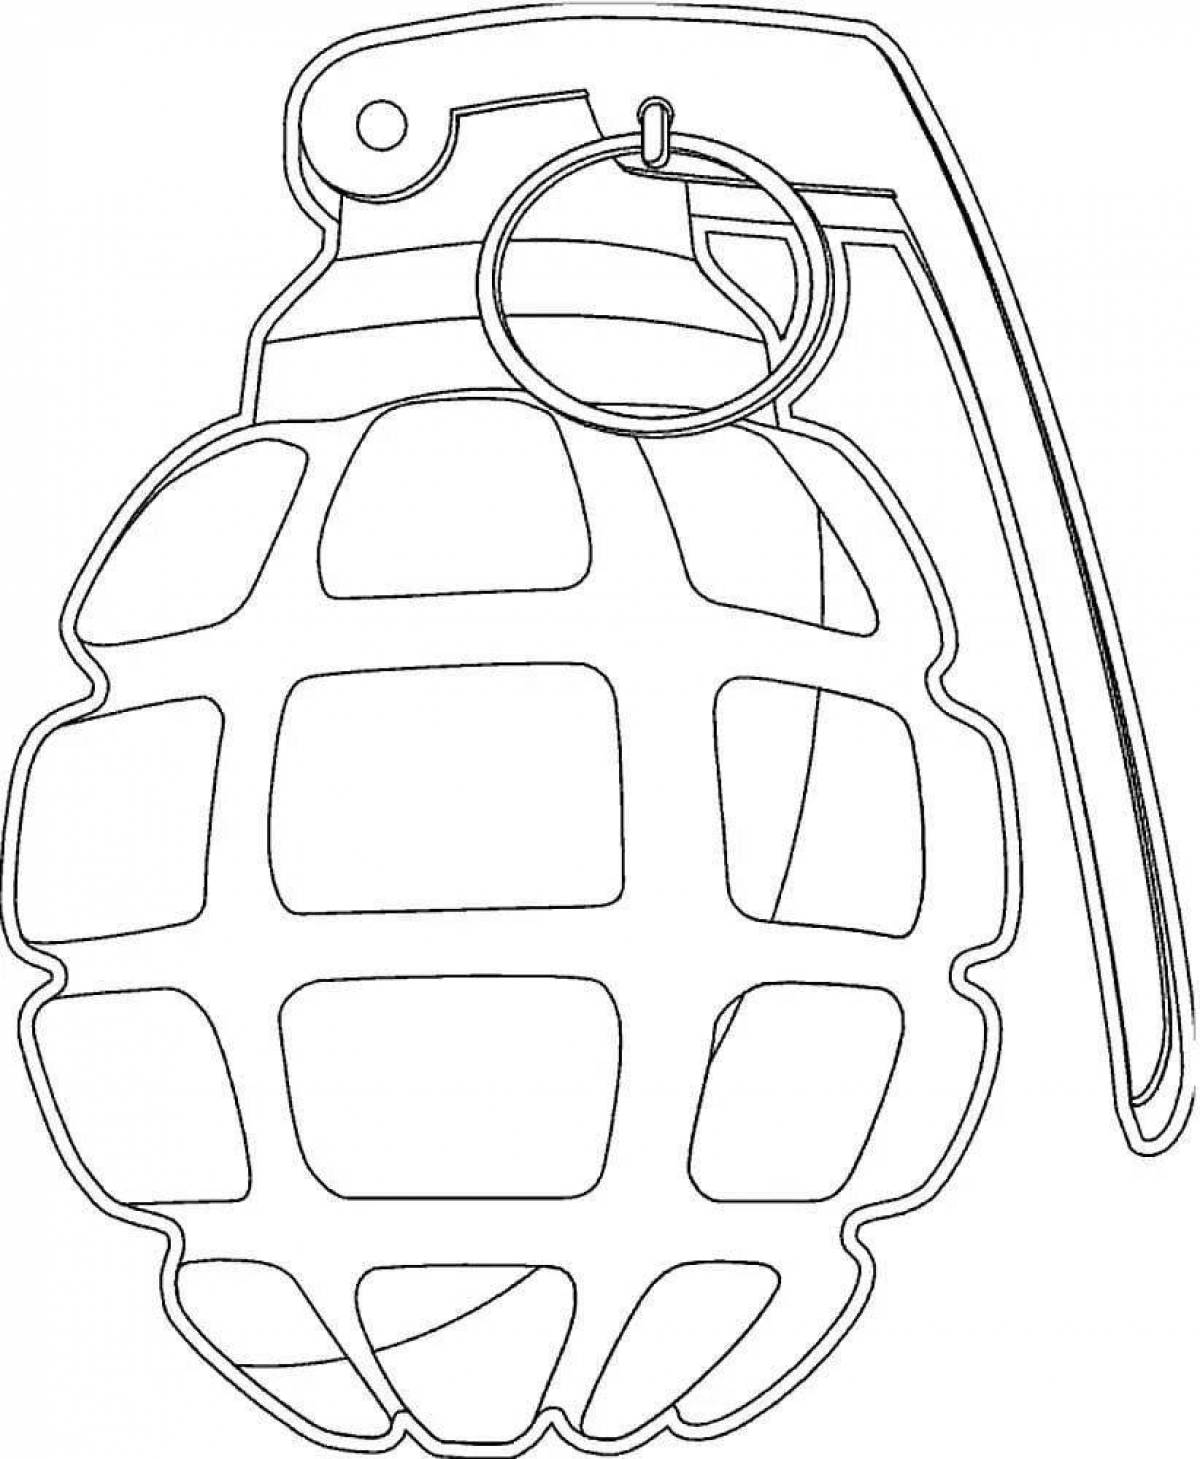 Attractive military weapons coloring page